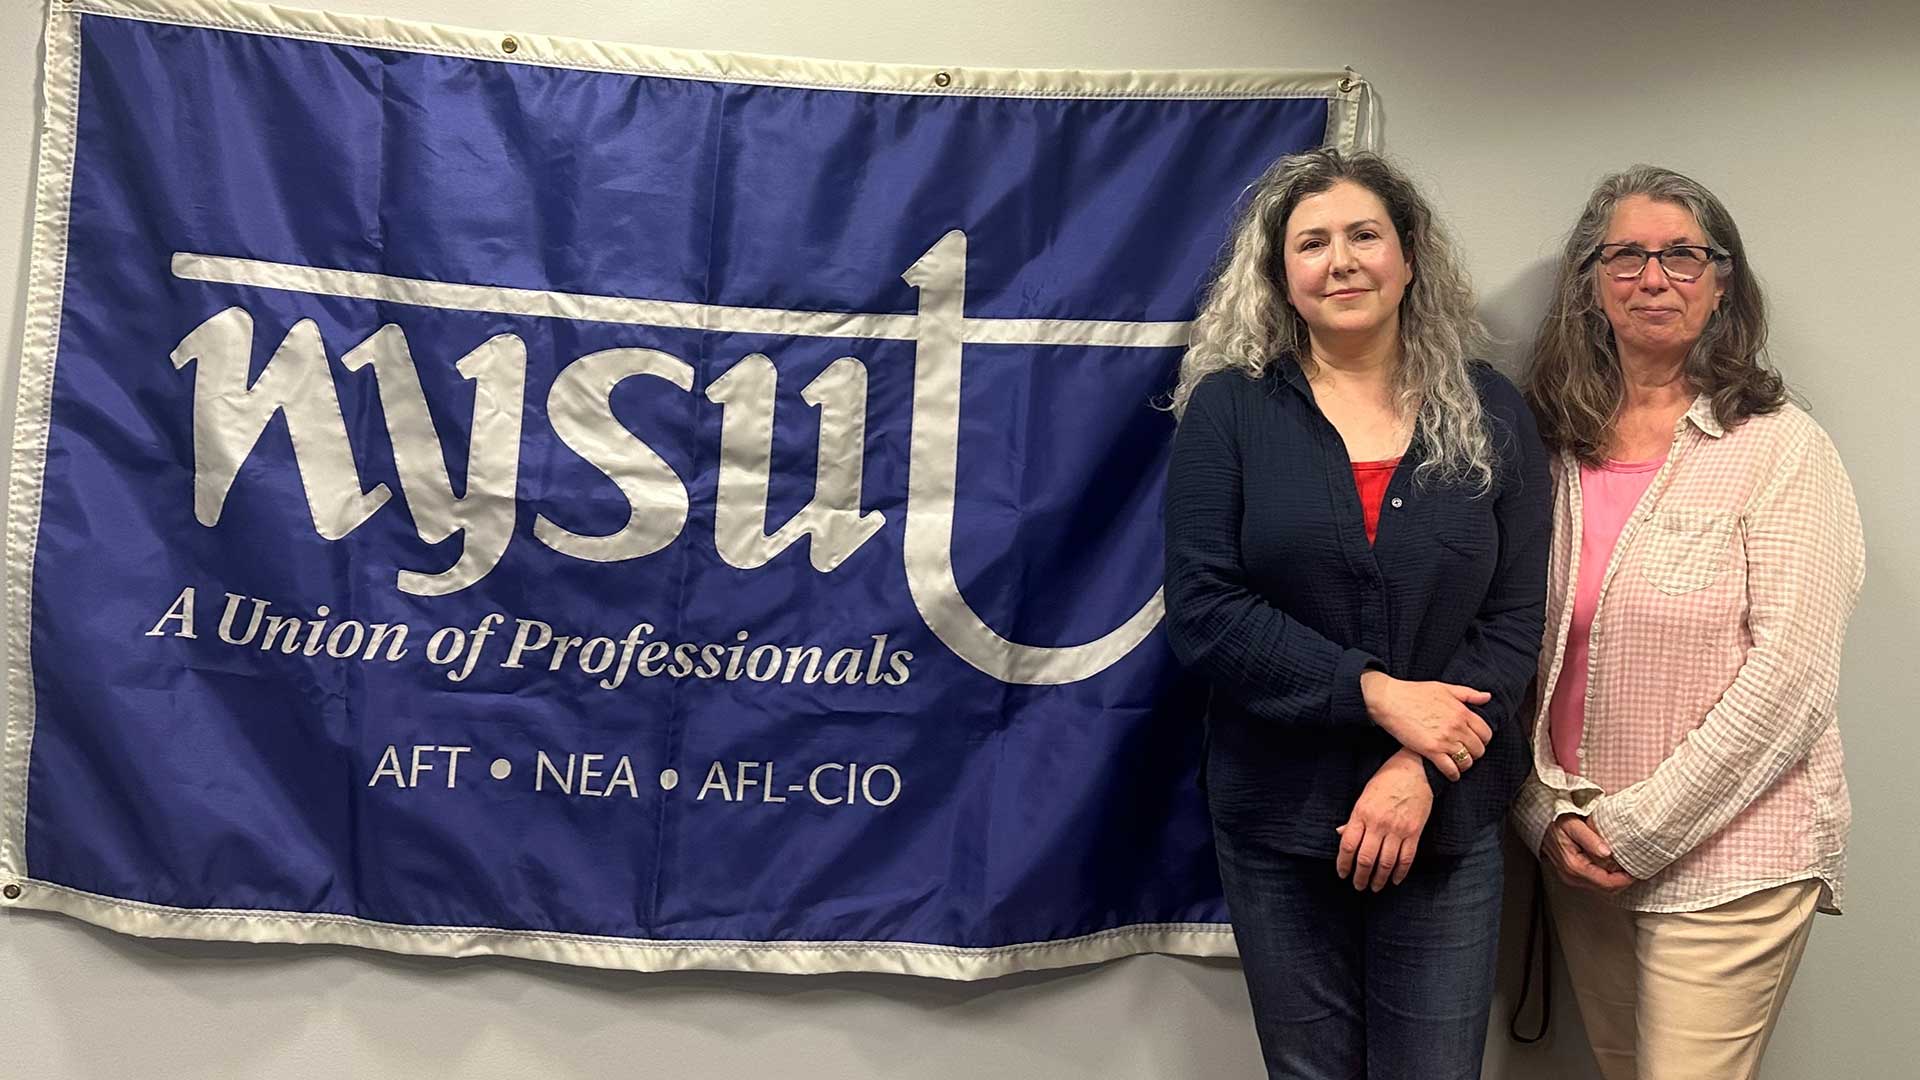 After decades as an independent union, Dutchess CC educators and professionals affiliate with NYSUT